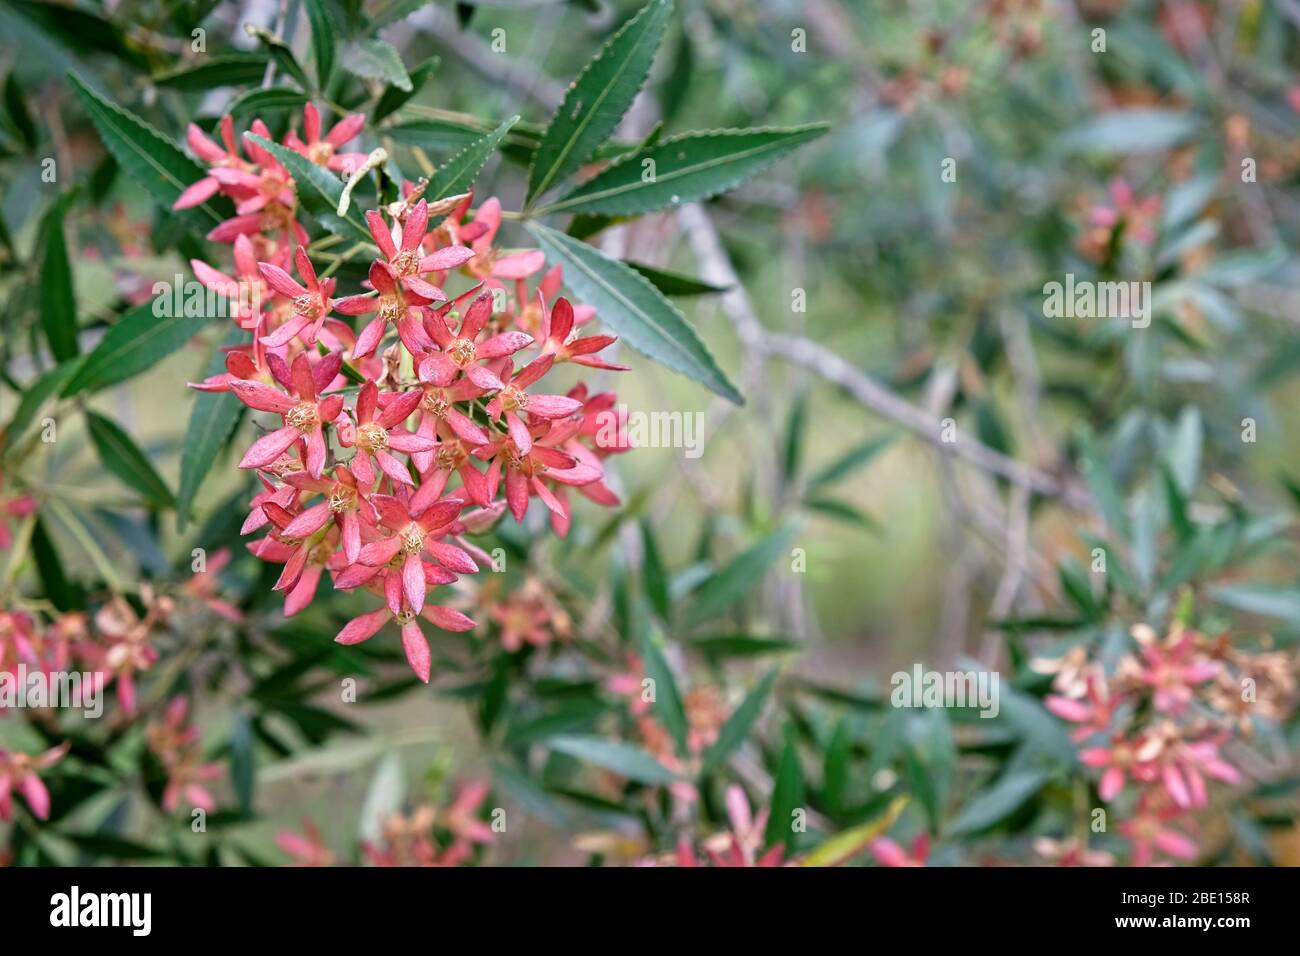 Australian Christmas Bush sepals which show when the petals fall. A distinguishing feature of this plant. Stock Photo